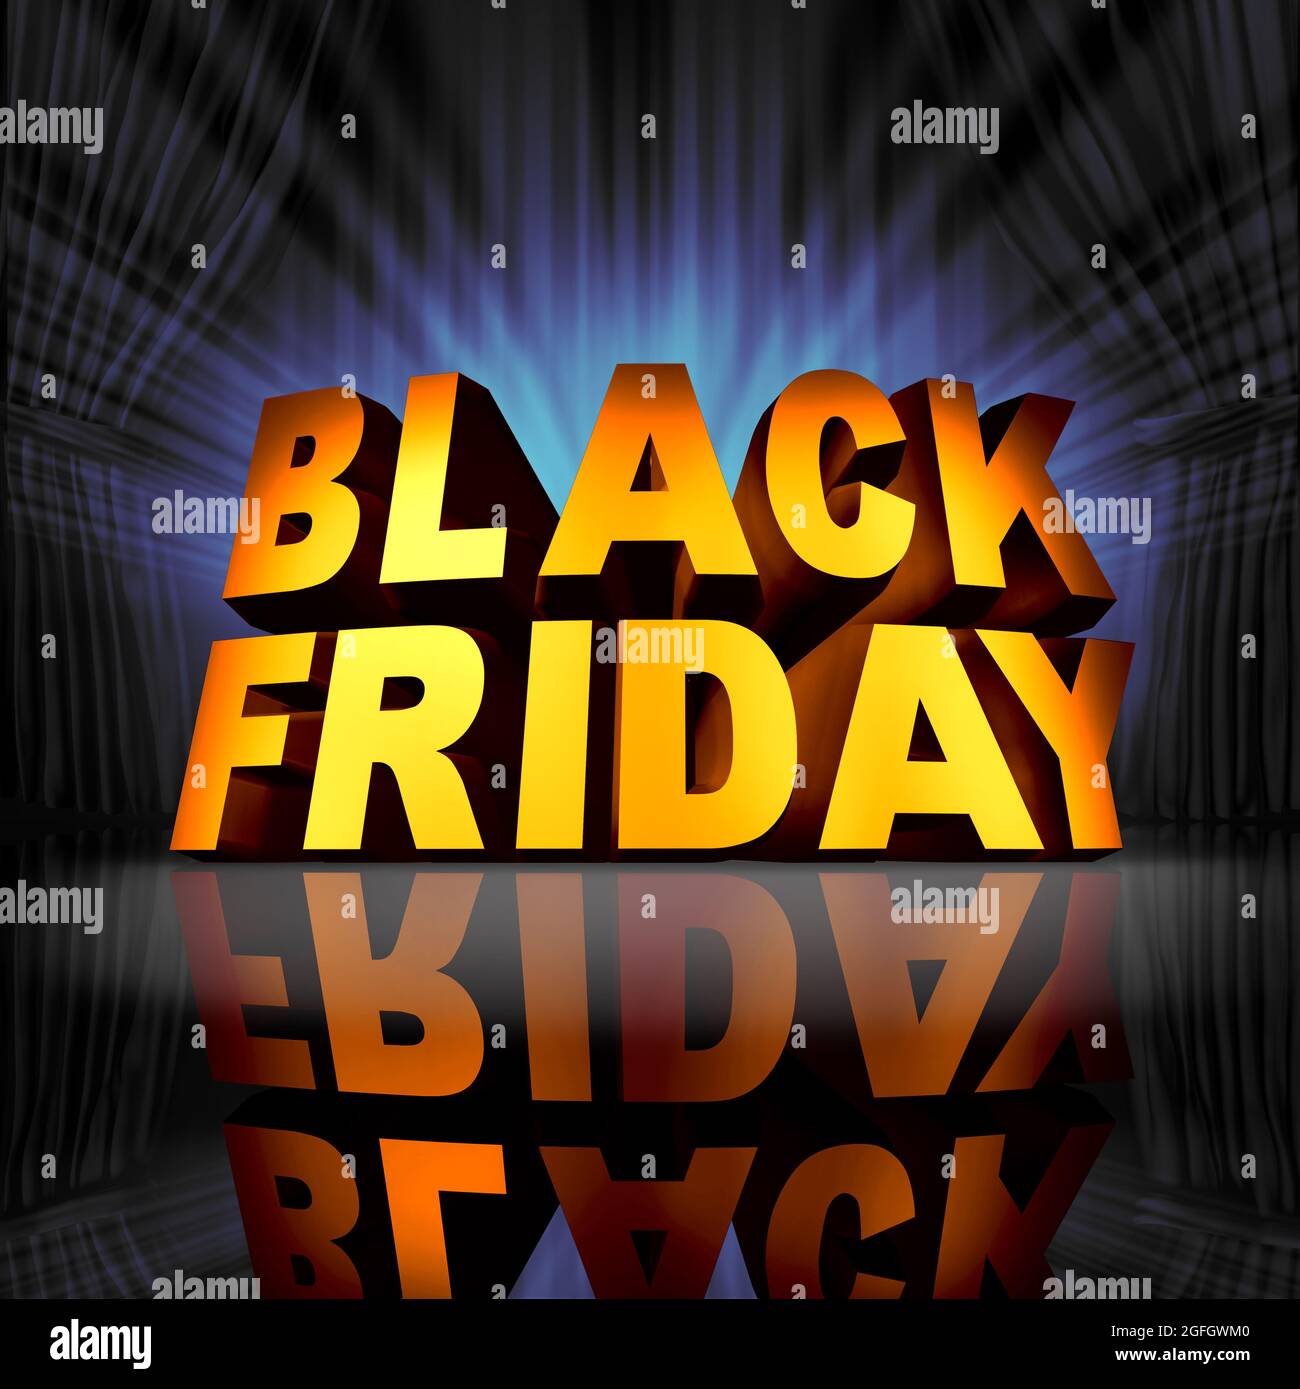 Black friday celebration event sale banner sign as text on stage as a thanksgiving November holiday christmas season shopping time for low prices. Stock Photo